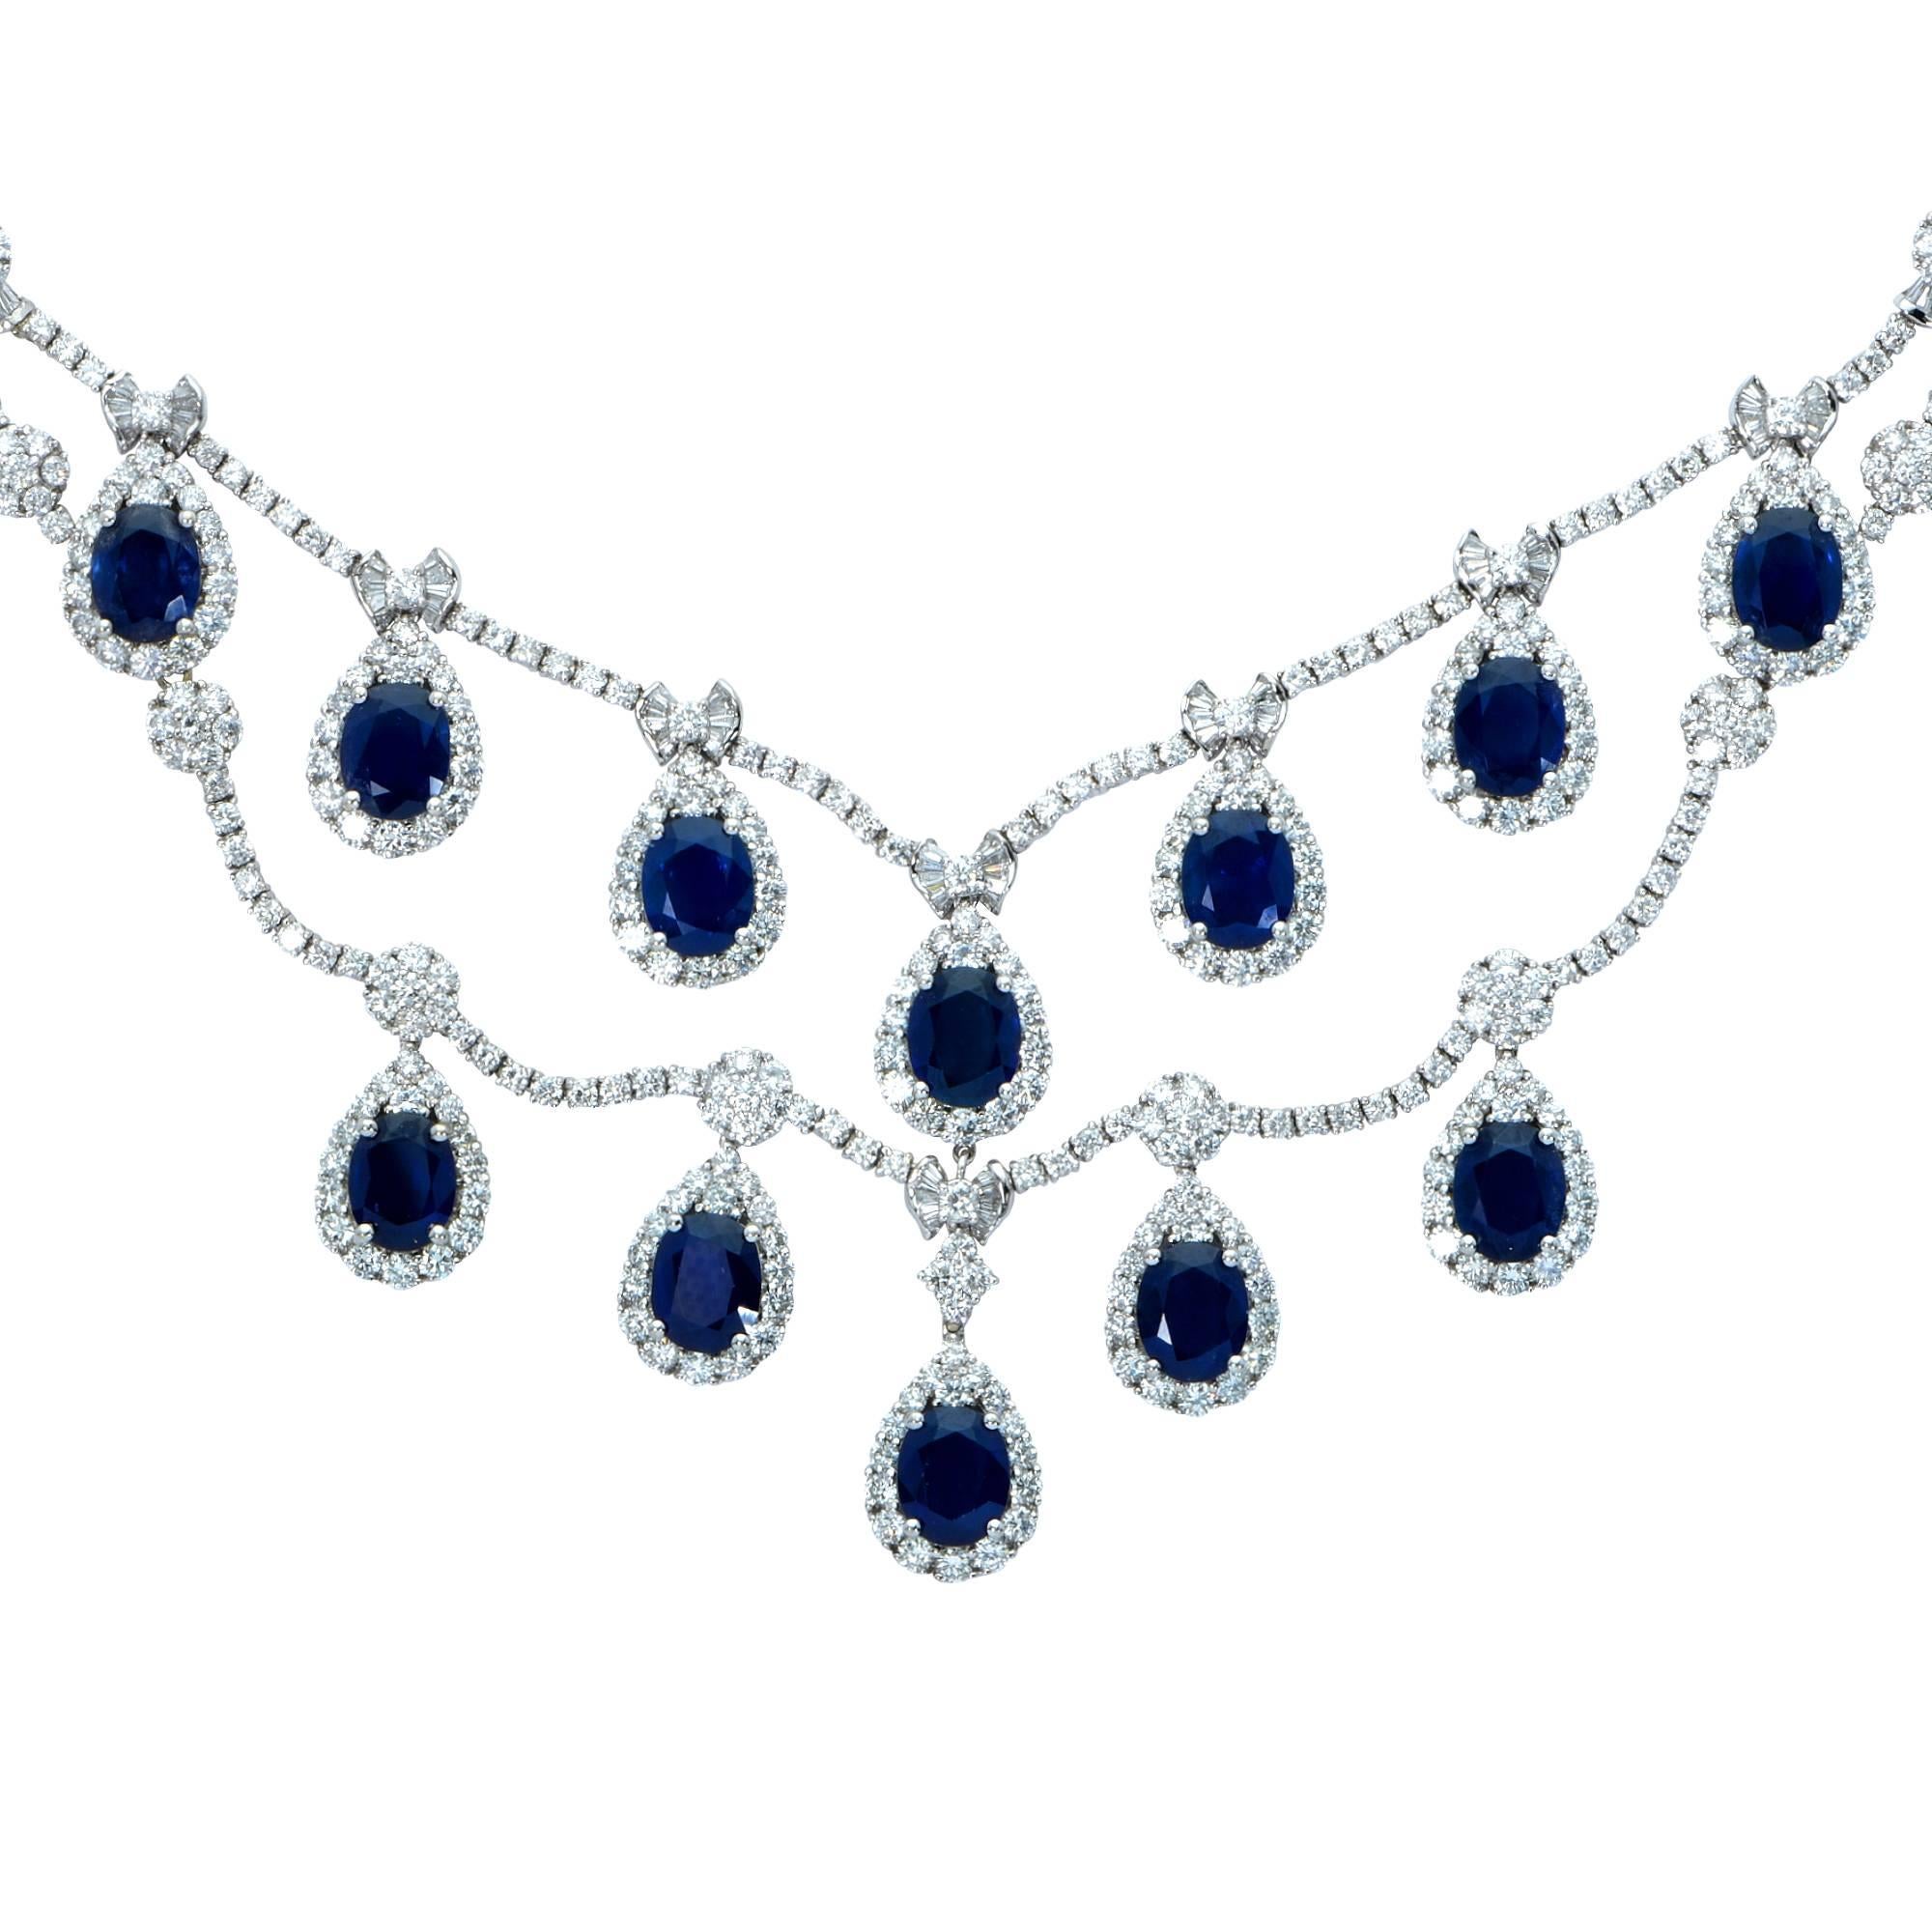 Elegant sapphire and diamond necklace crafted in 18k white gold. This necklace boasts a total approximate weight of 40 carats of rich deep royal blue oval shape sapphires set in a sea of 539 white round brilliant and baguette cut diamonds weighing